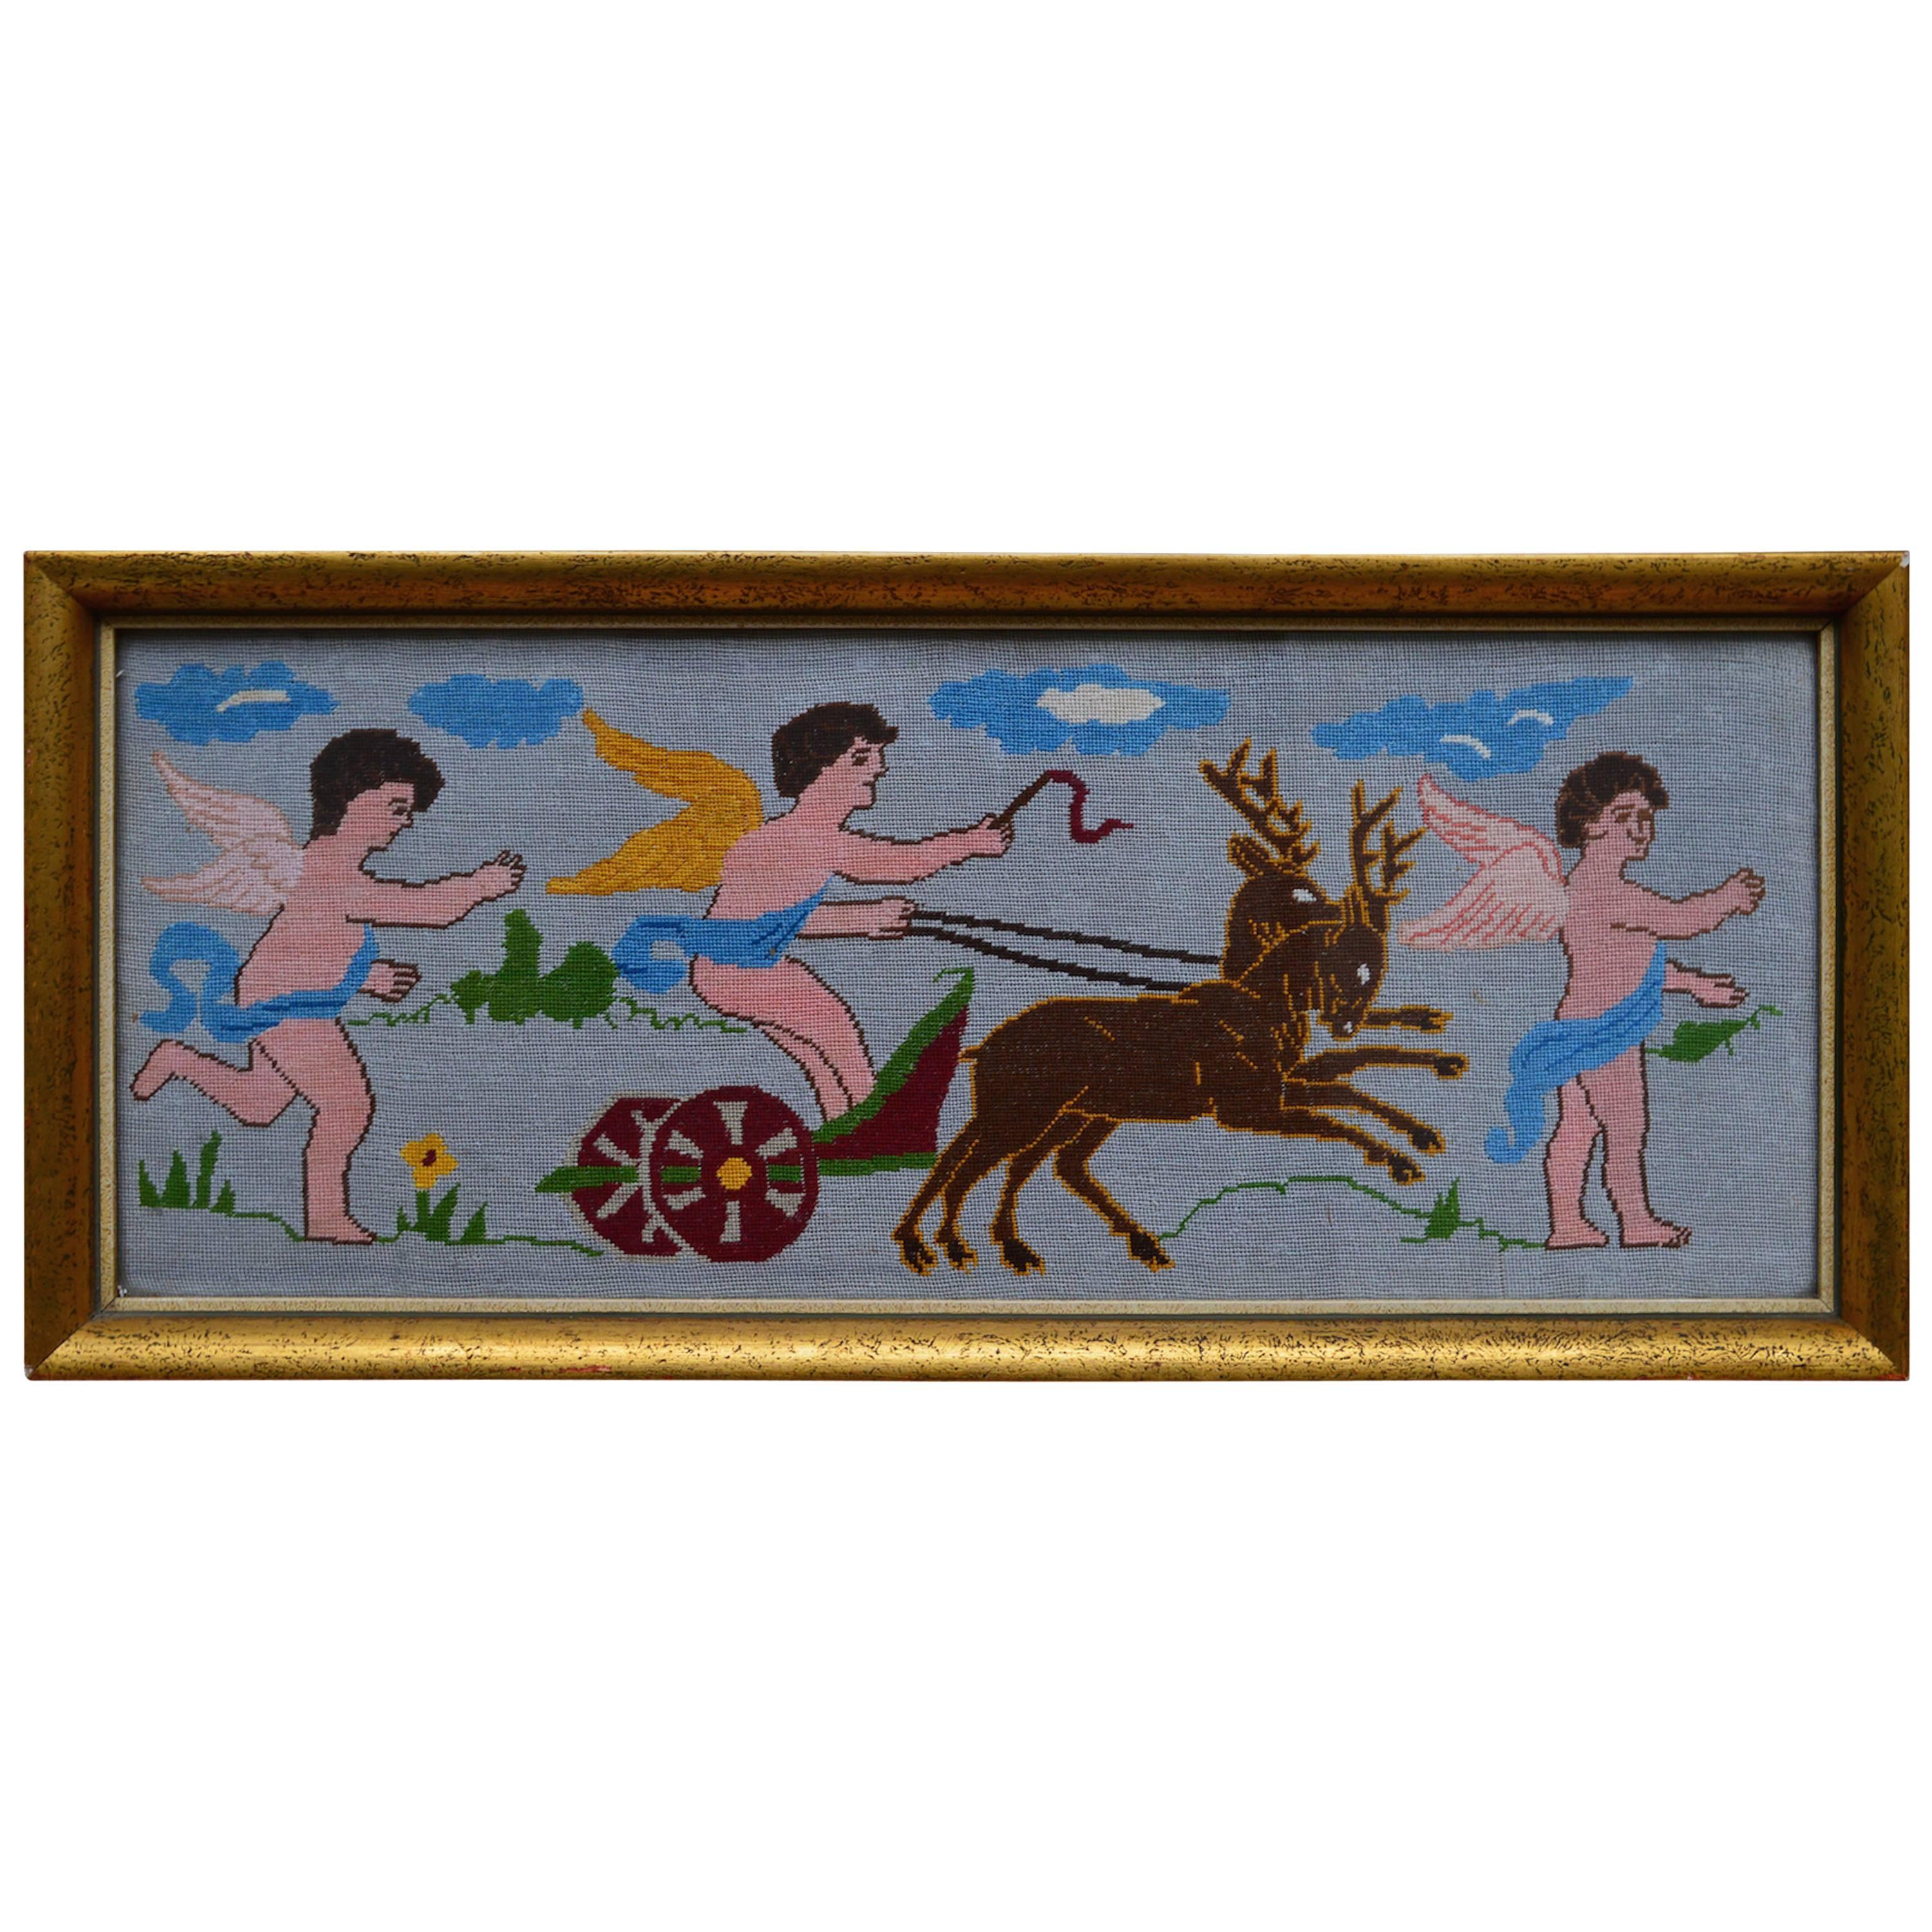  Swedish Needlepoint Textile Showing Cherubs with a Chariot Pulled by Deer For Sale